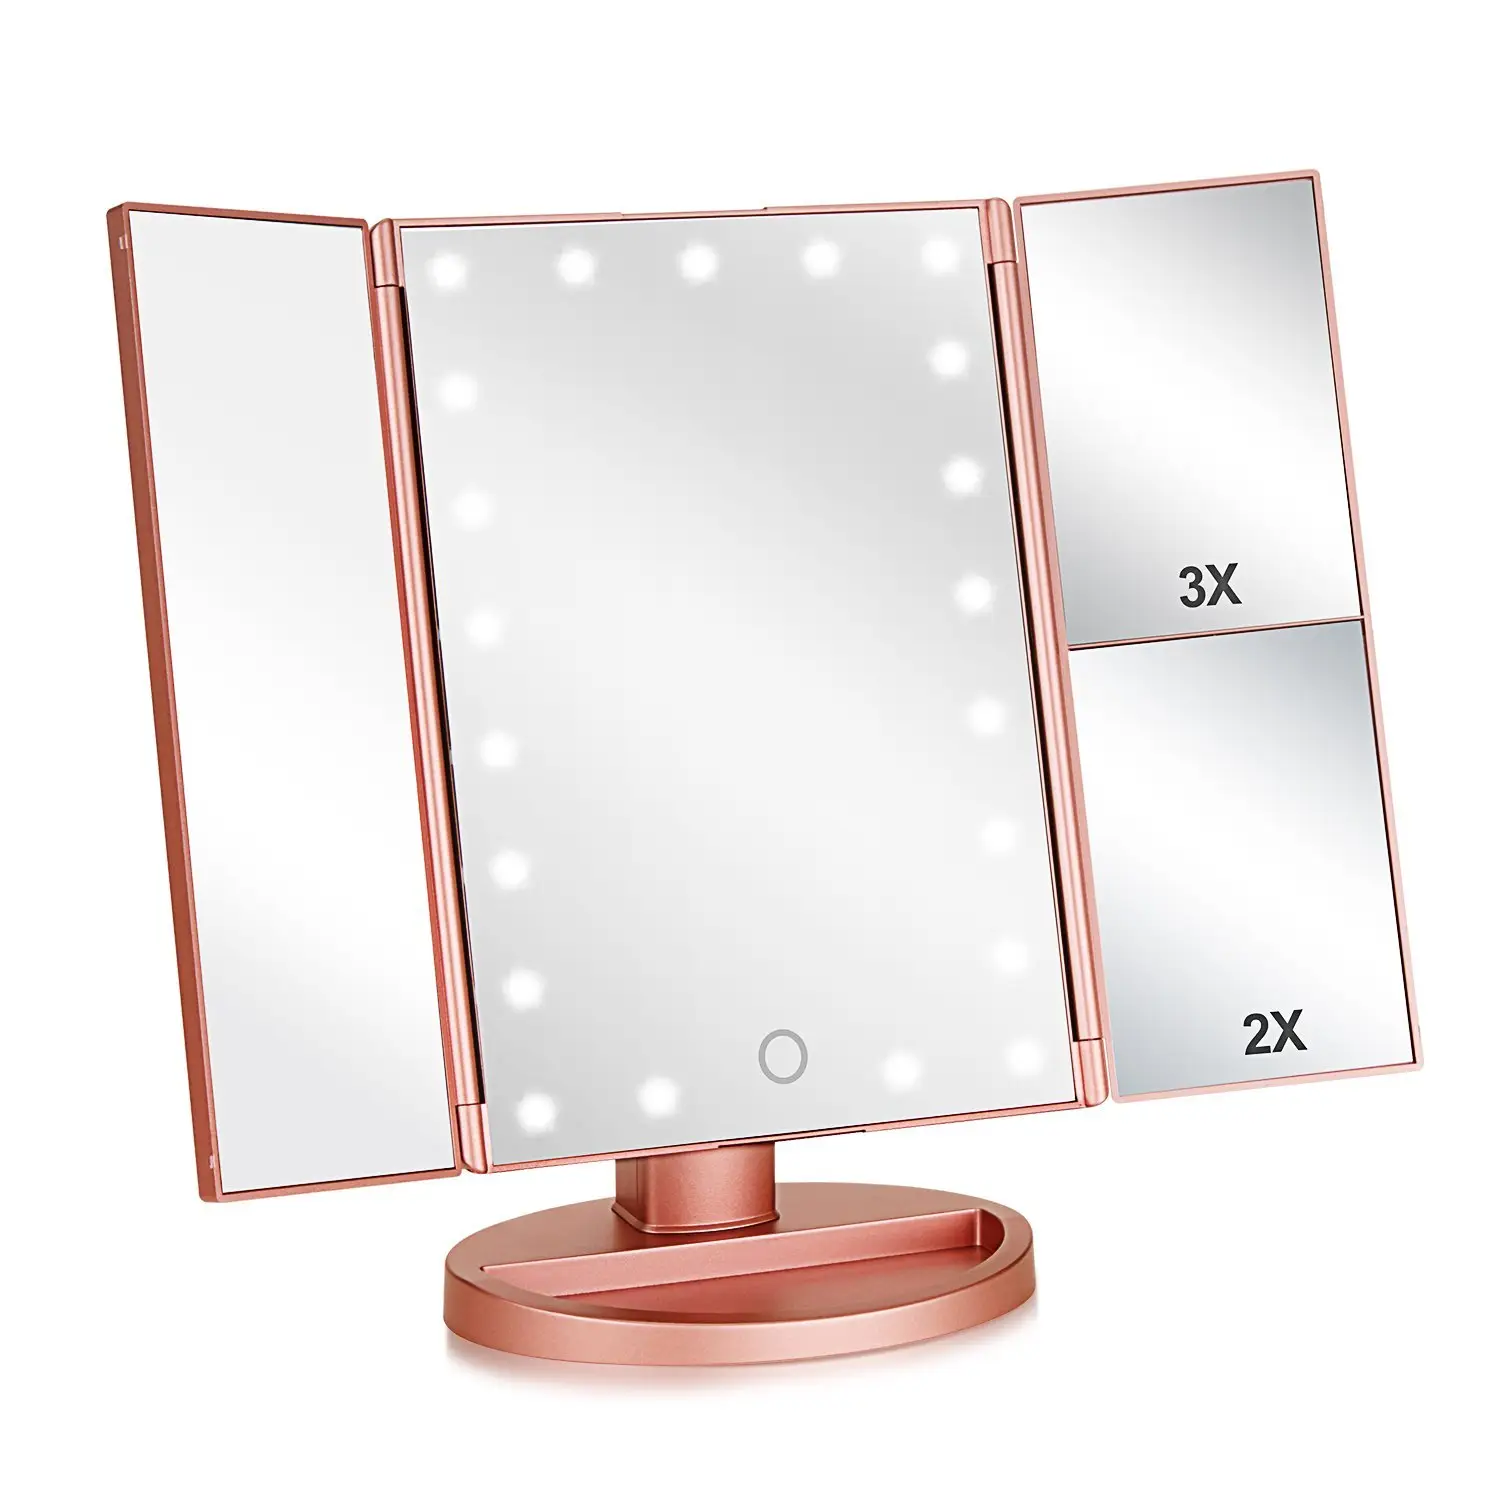 Amazon Hot Selling 2X 3X 10X Magnification Lighted Makeup Mirror LED Standing Mirror Vanity Mirror with Lights